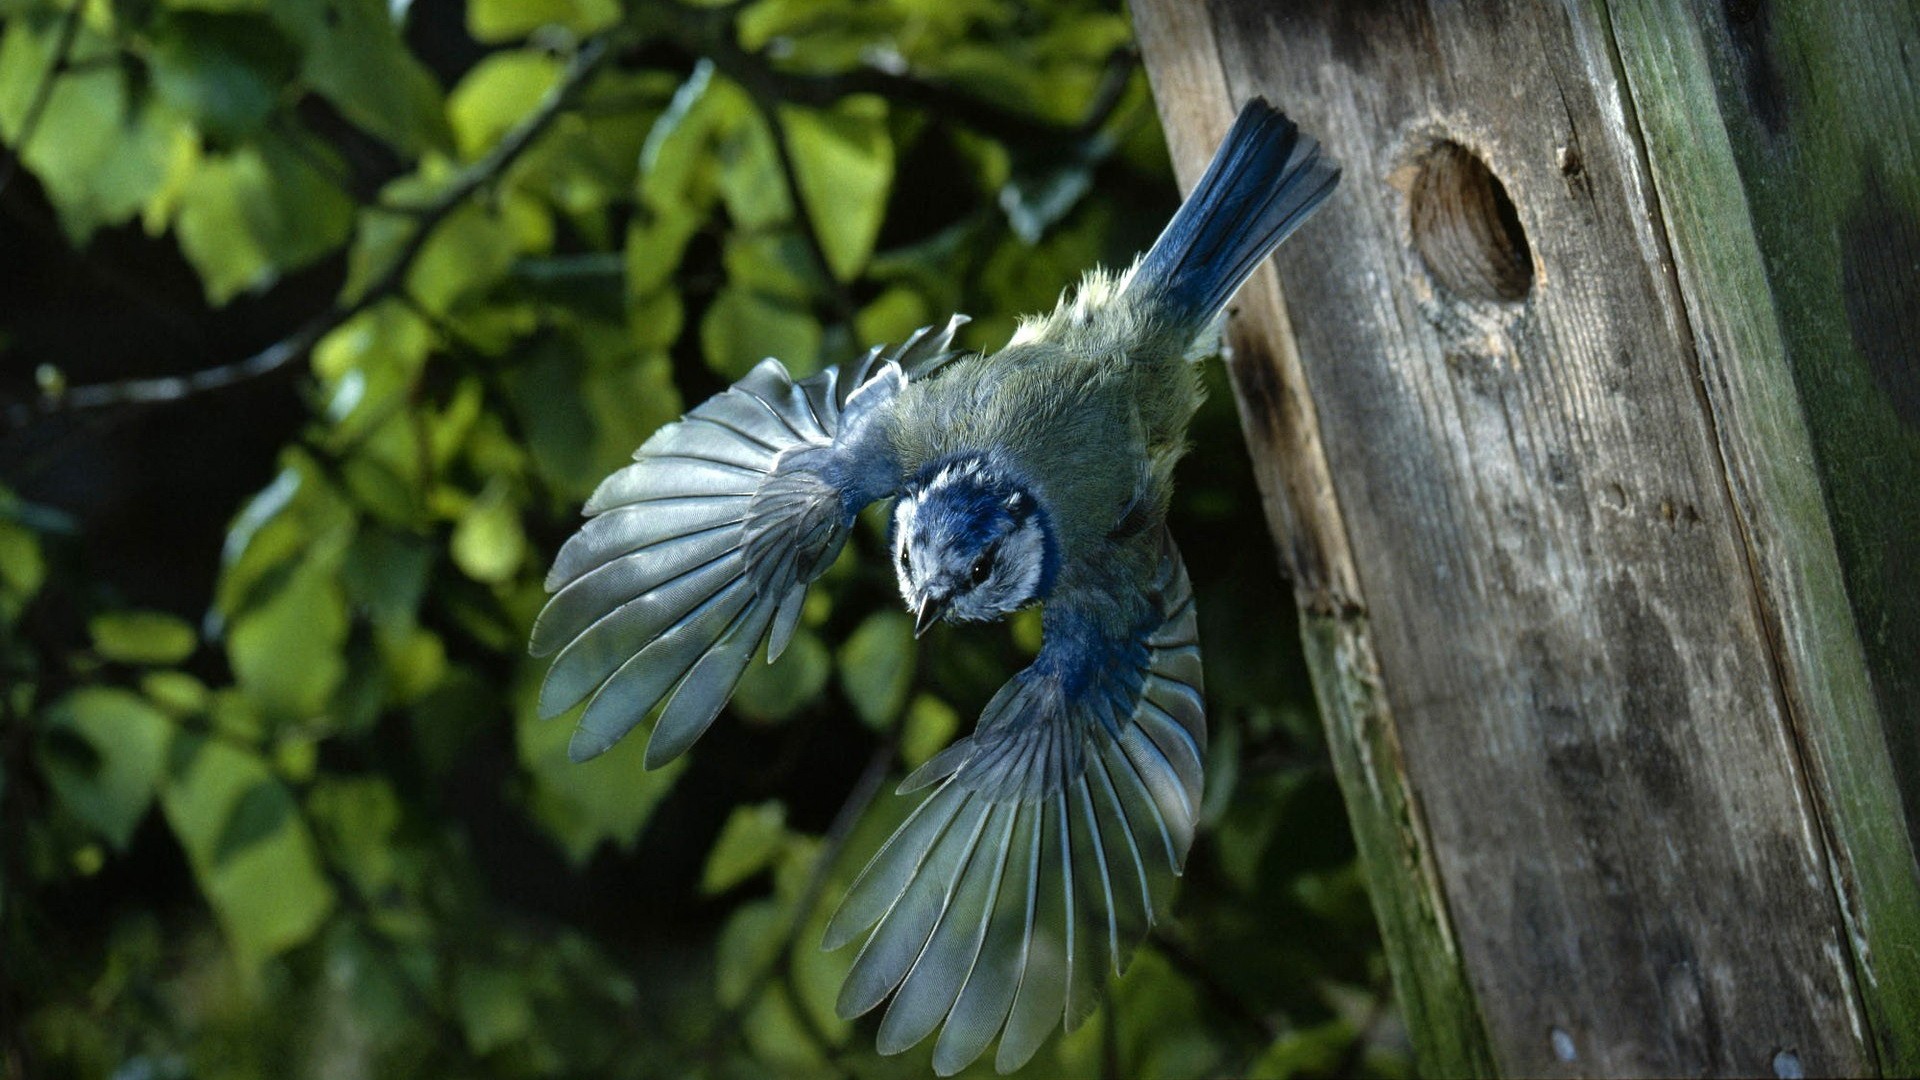 General 1920x1080 nature birds animals flying wings blue jays